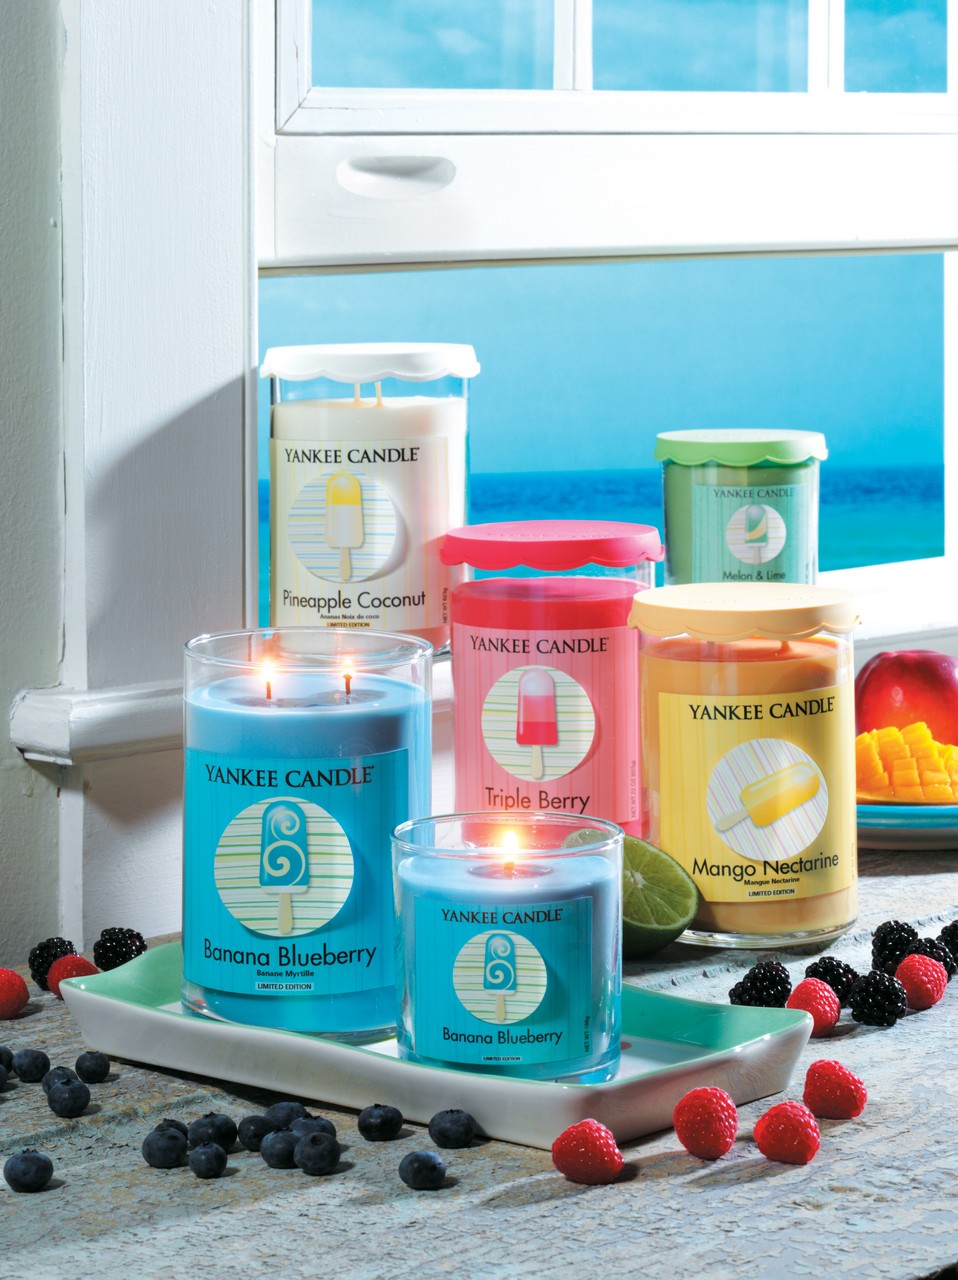  Collection Cool Pops Yankee candle 2013 